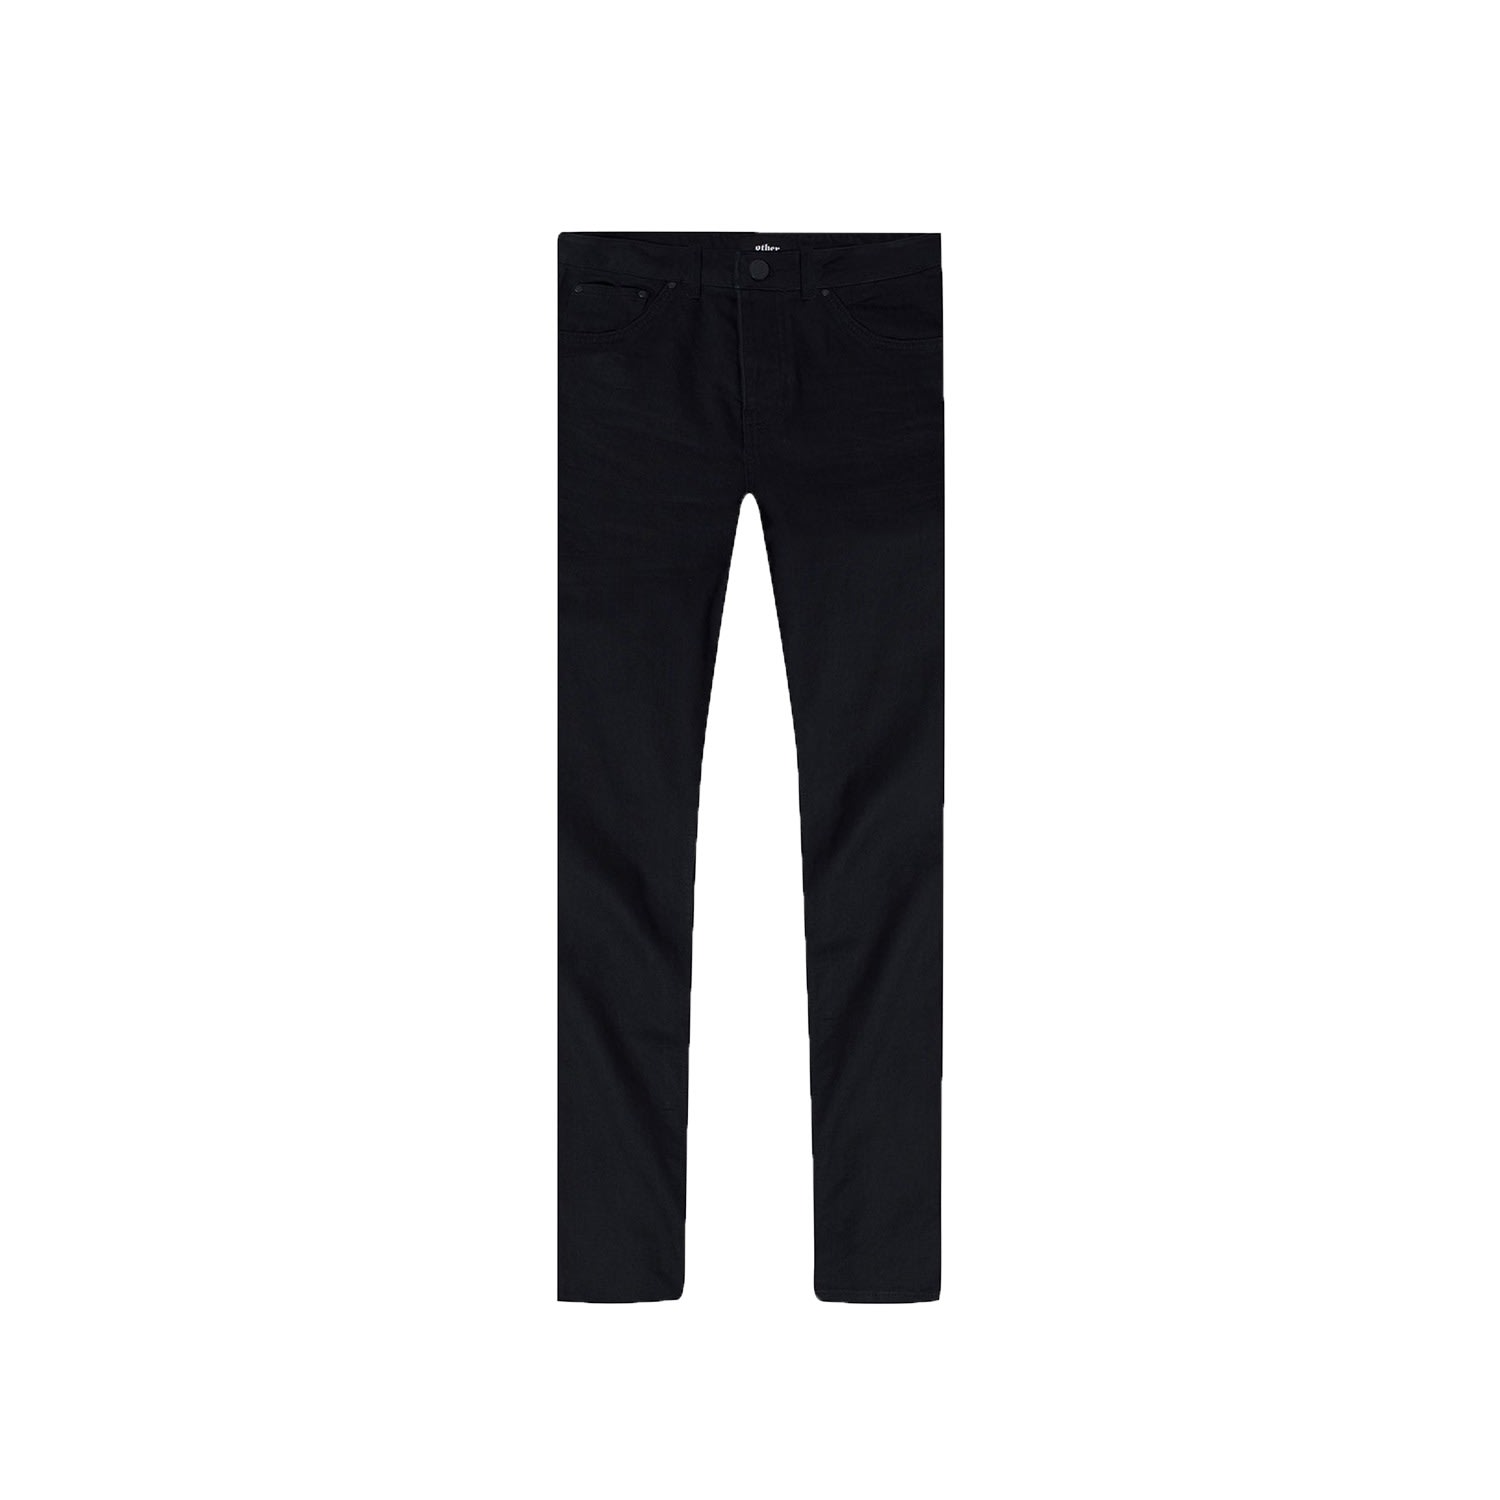 Men’s One One Six Essential Jeans - Jet Black 30" OTHER UK